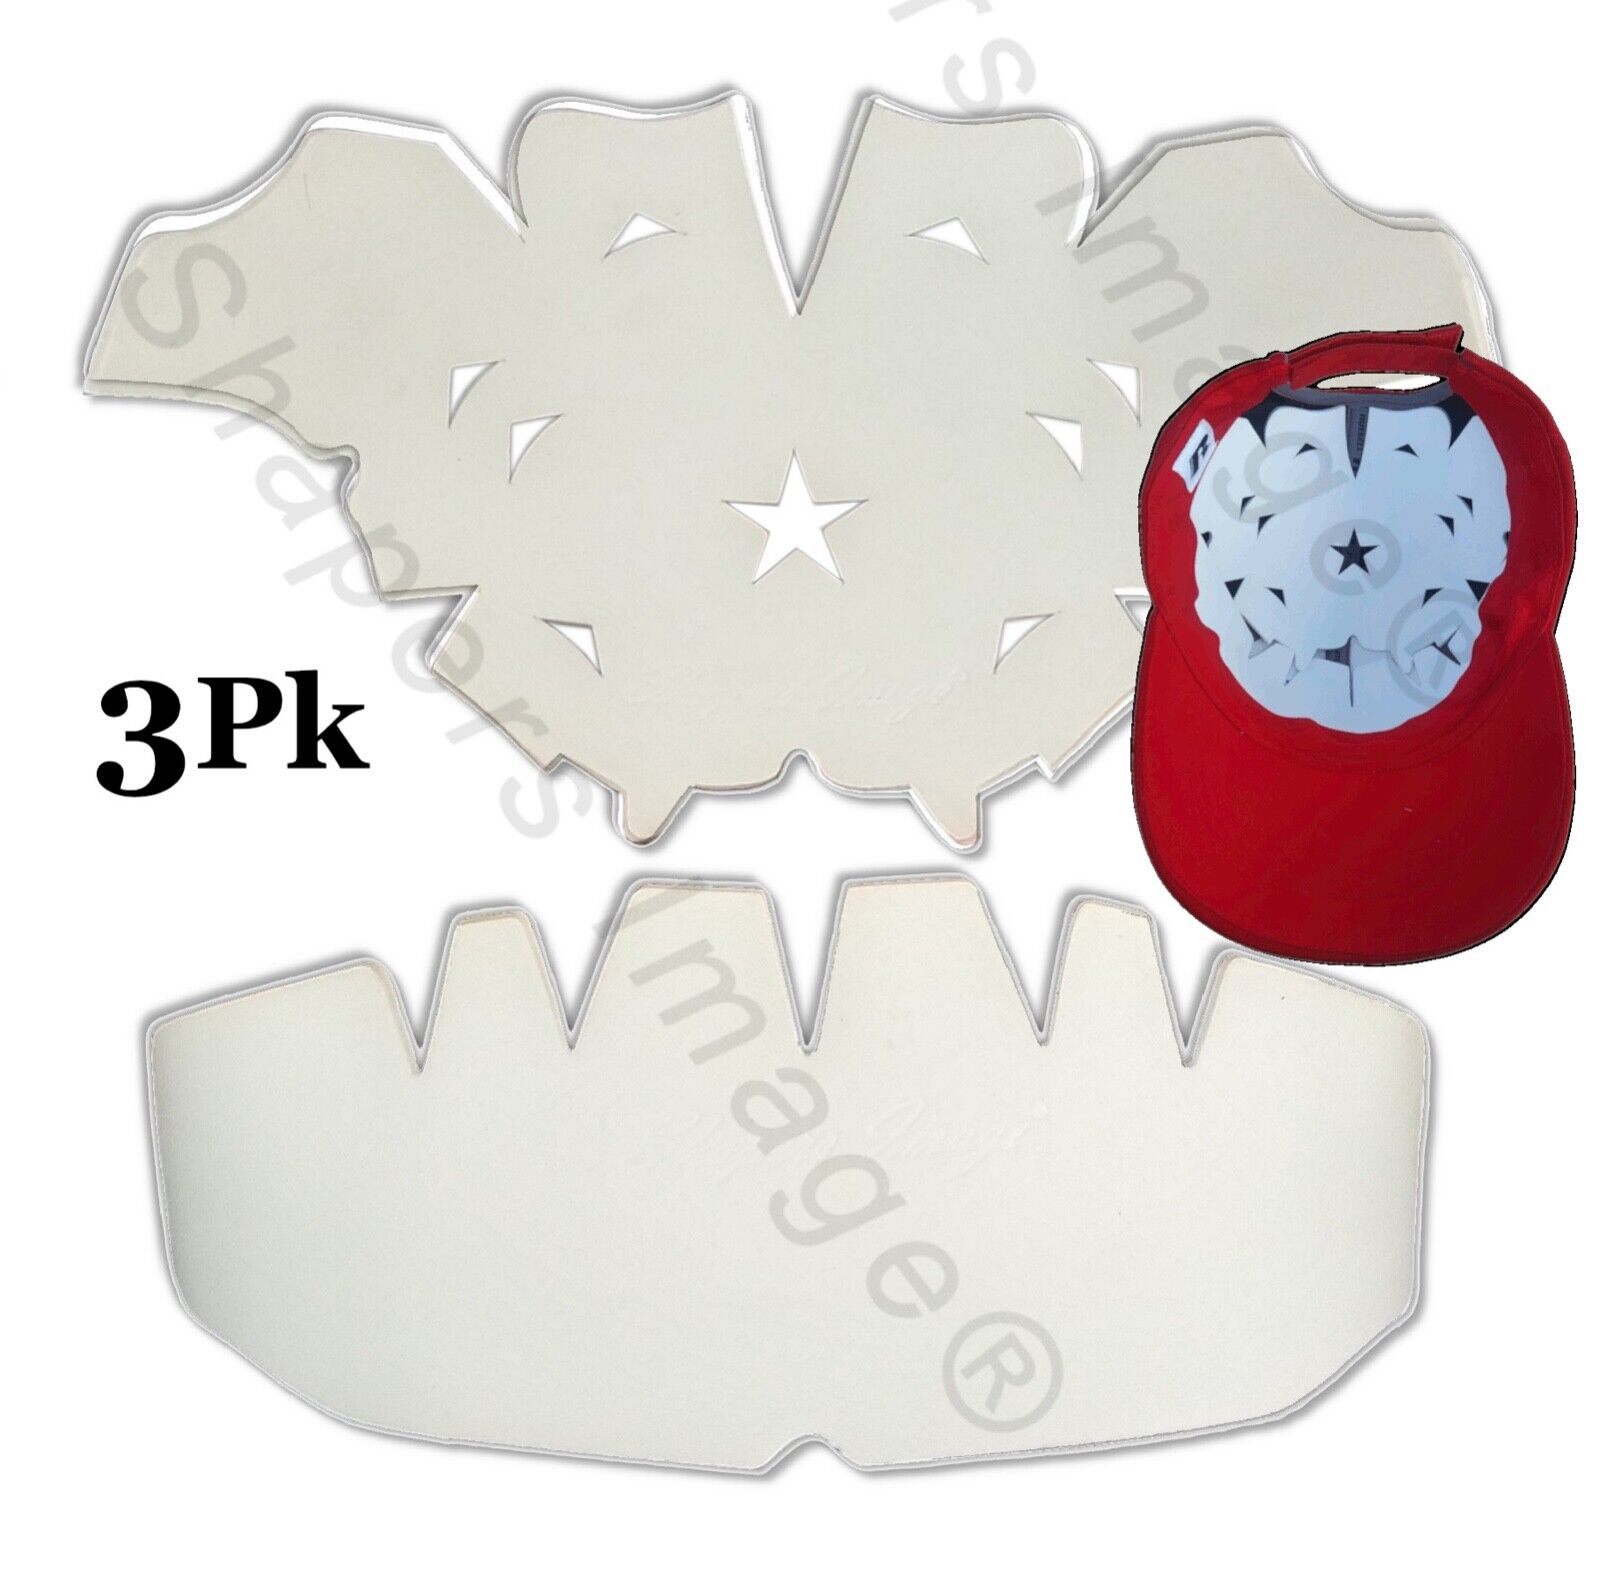 3Pk.WHITE-One Size Fits All Baseball Cap Crown Insert & Panel Hat Shaper Combo  Shapers Image®